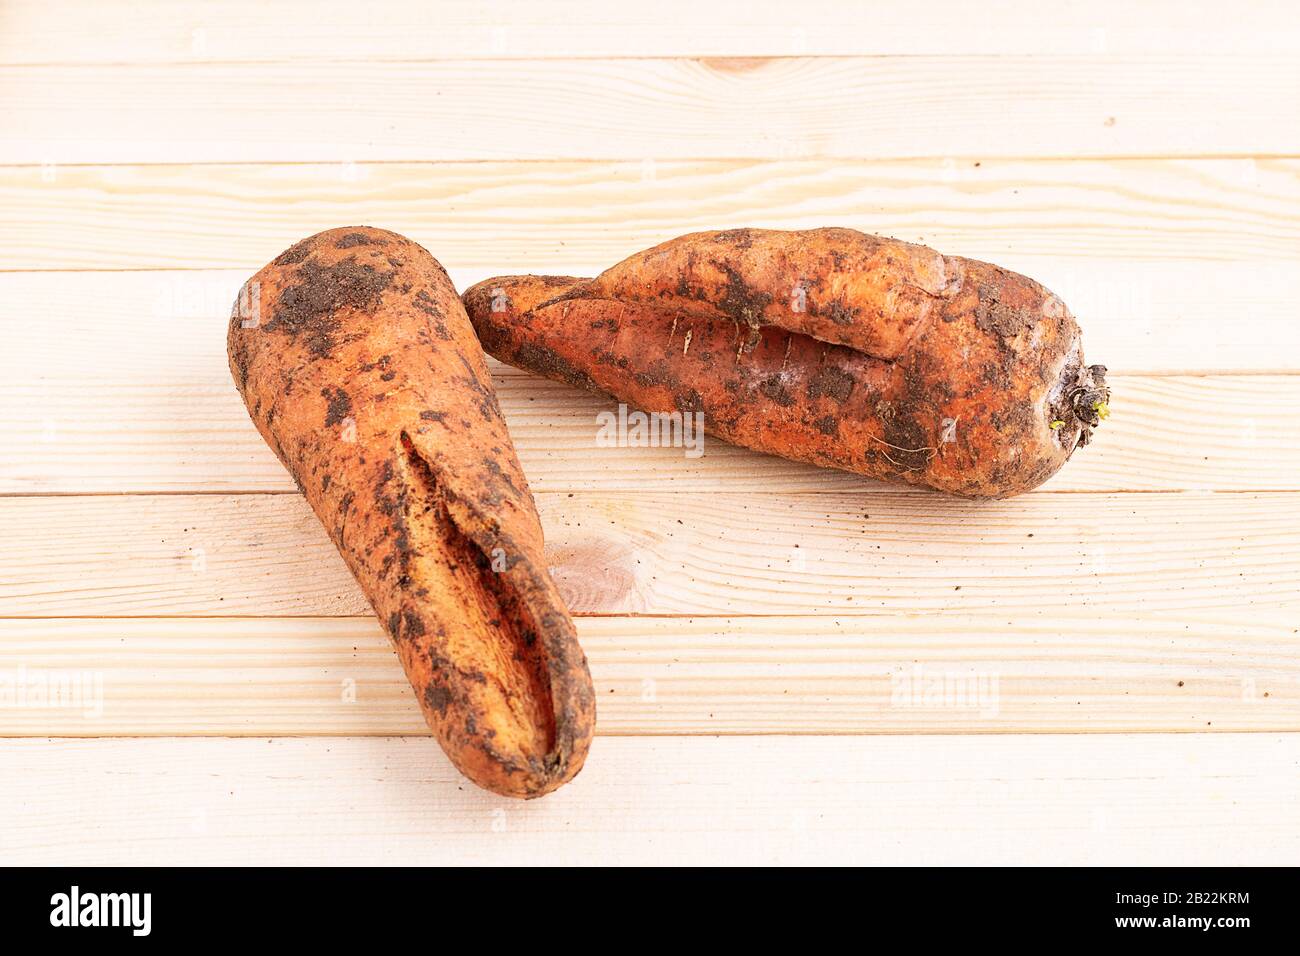 Ugly carrots on wooden table, top view Stock Photo